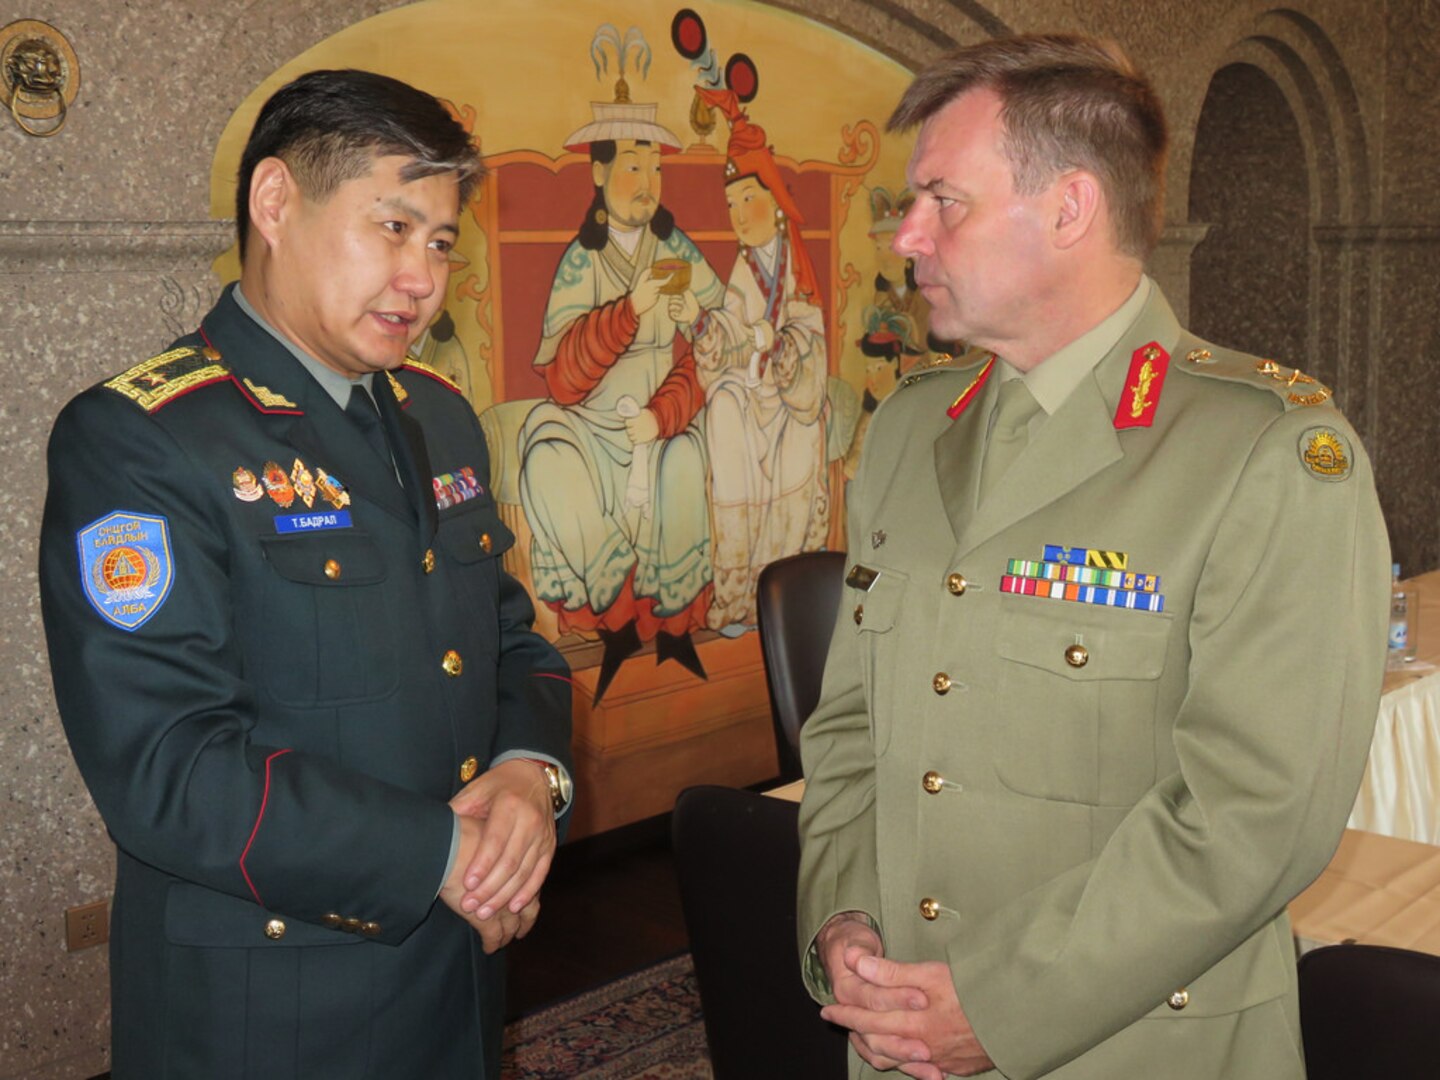 ULAANBAATAR, Mongolia (Mar. 24, 2015) - U.S. Army Pacific Deputy Commanding General (Operations), Maj. Gen. Gregory Bilton and Chief of the National Emergency Management Agency, Brig. Gen. Tuvshin Badral discuss the opening of Gobi Wolf. Gobi Wolf 2015 is a civil-military disaster preparedness and response initiative that focuses on regional readiness in response to natural and man-made disasters. 